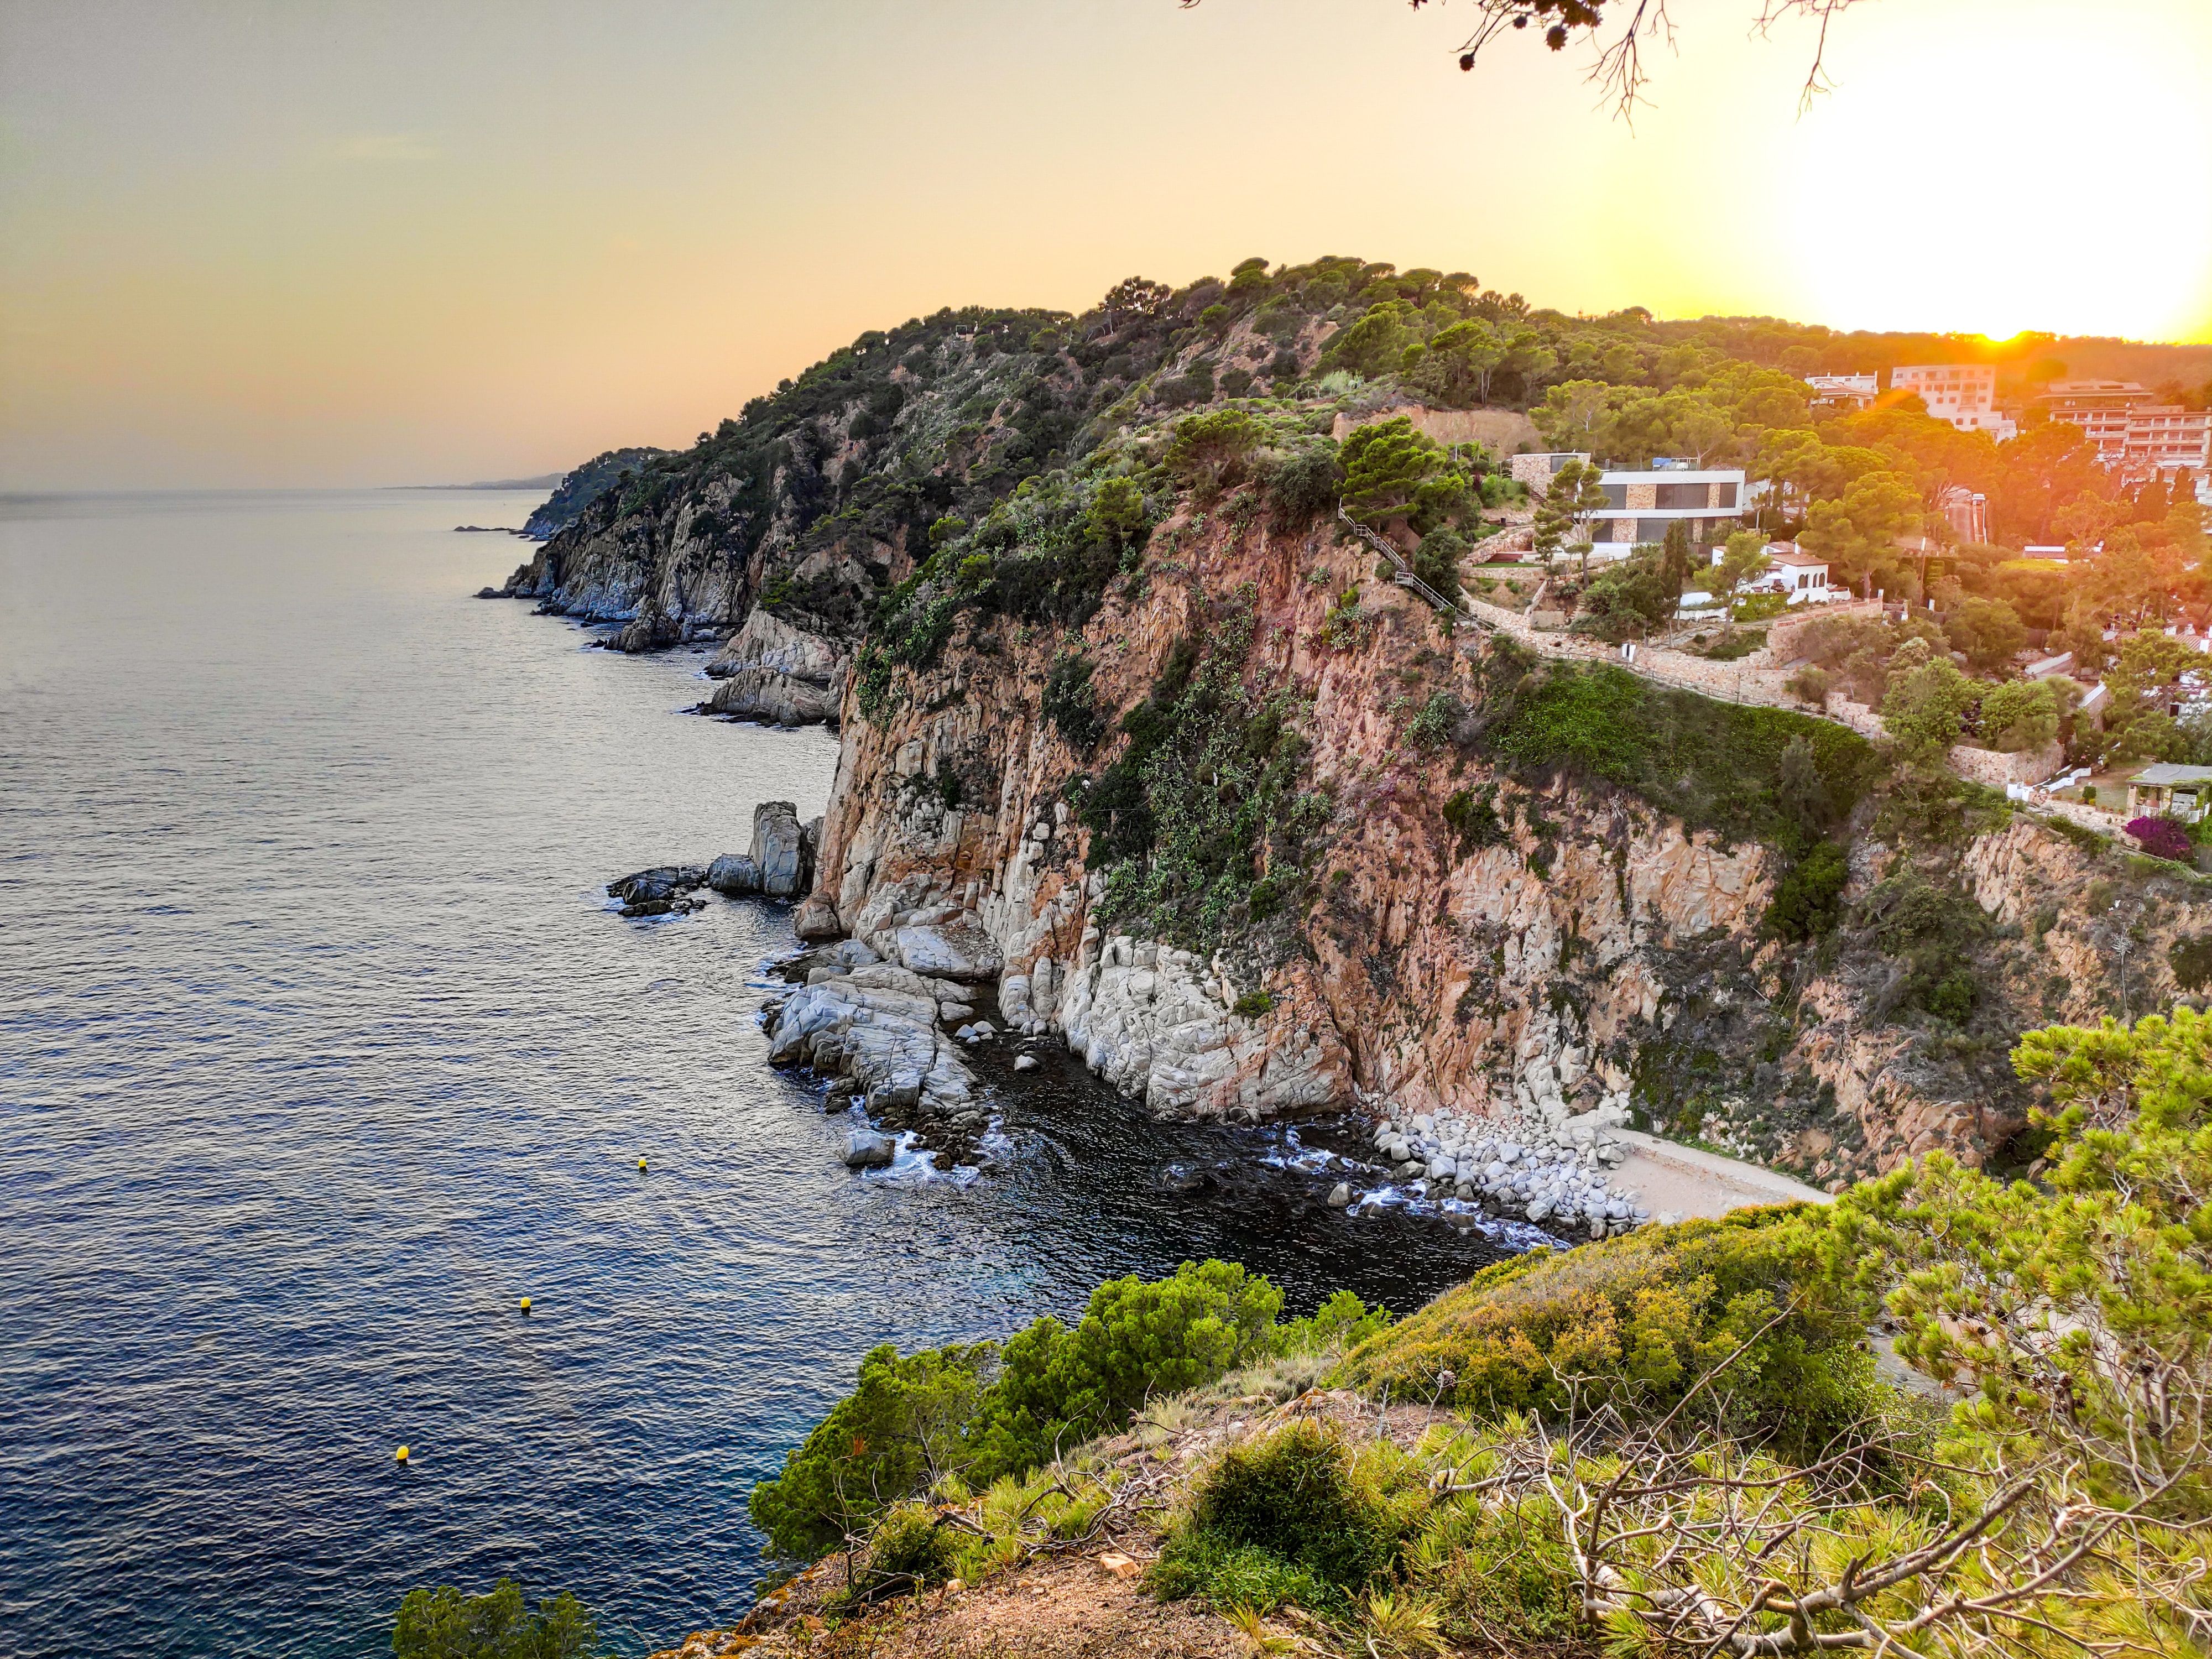 Sunset Point at a Cliff in Catalonia, Spain